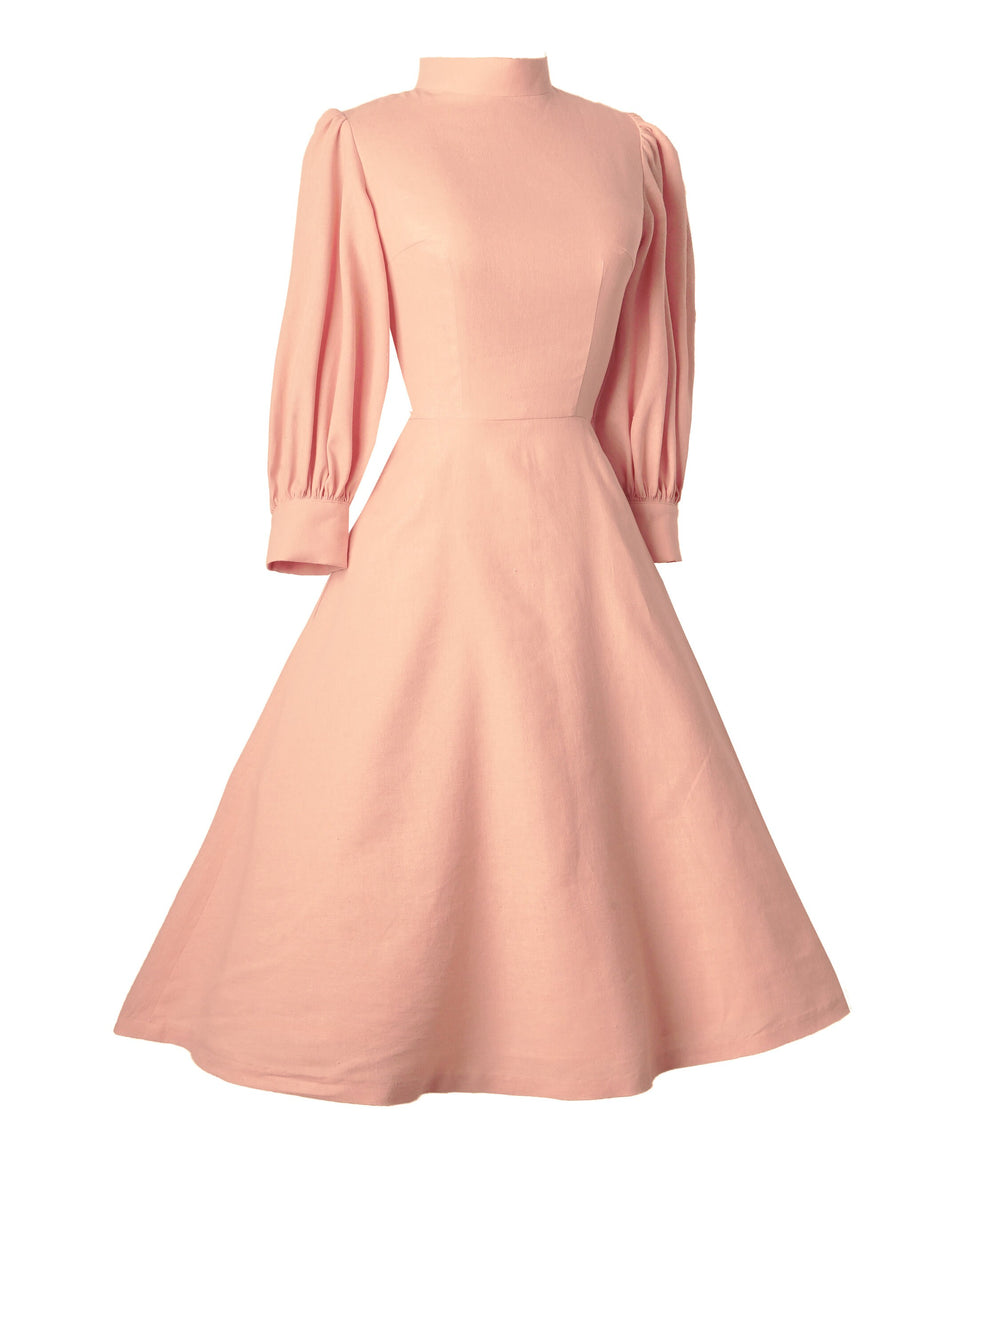 RTS - Size S - Beatrix Dress in Pink Champagne Linen